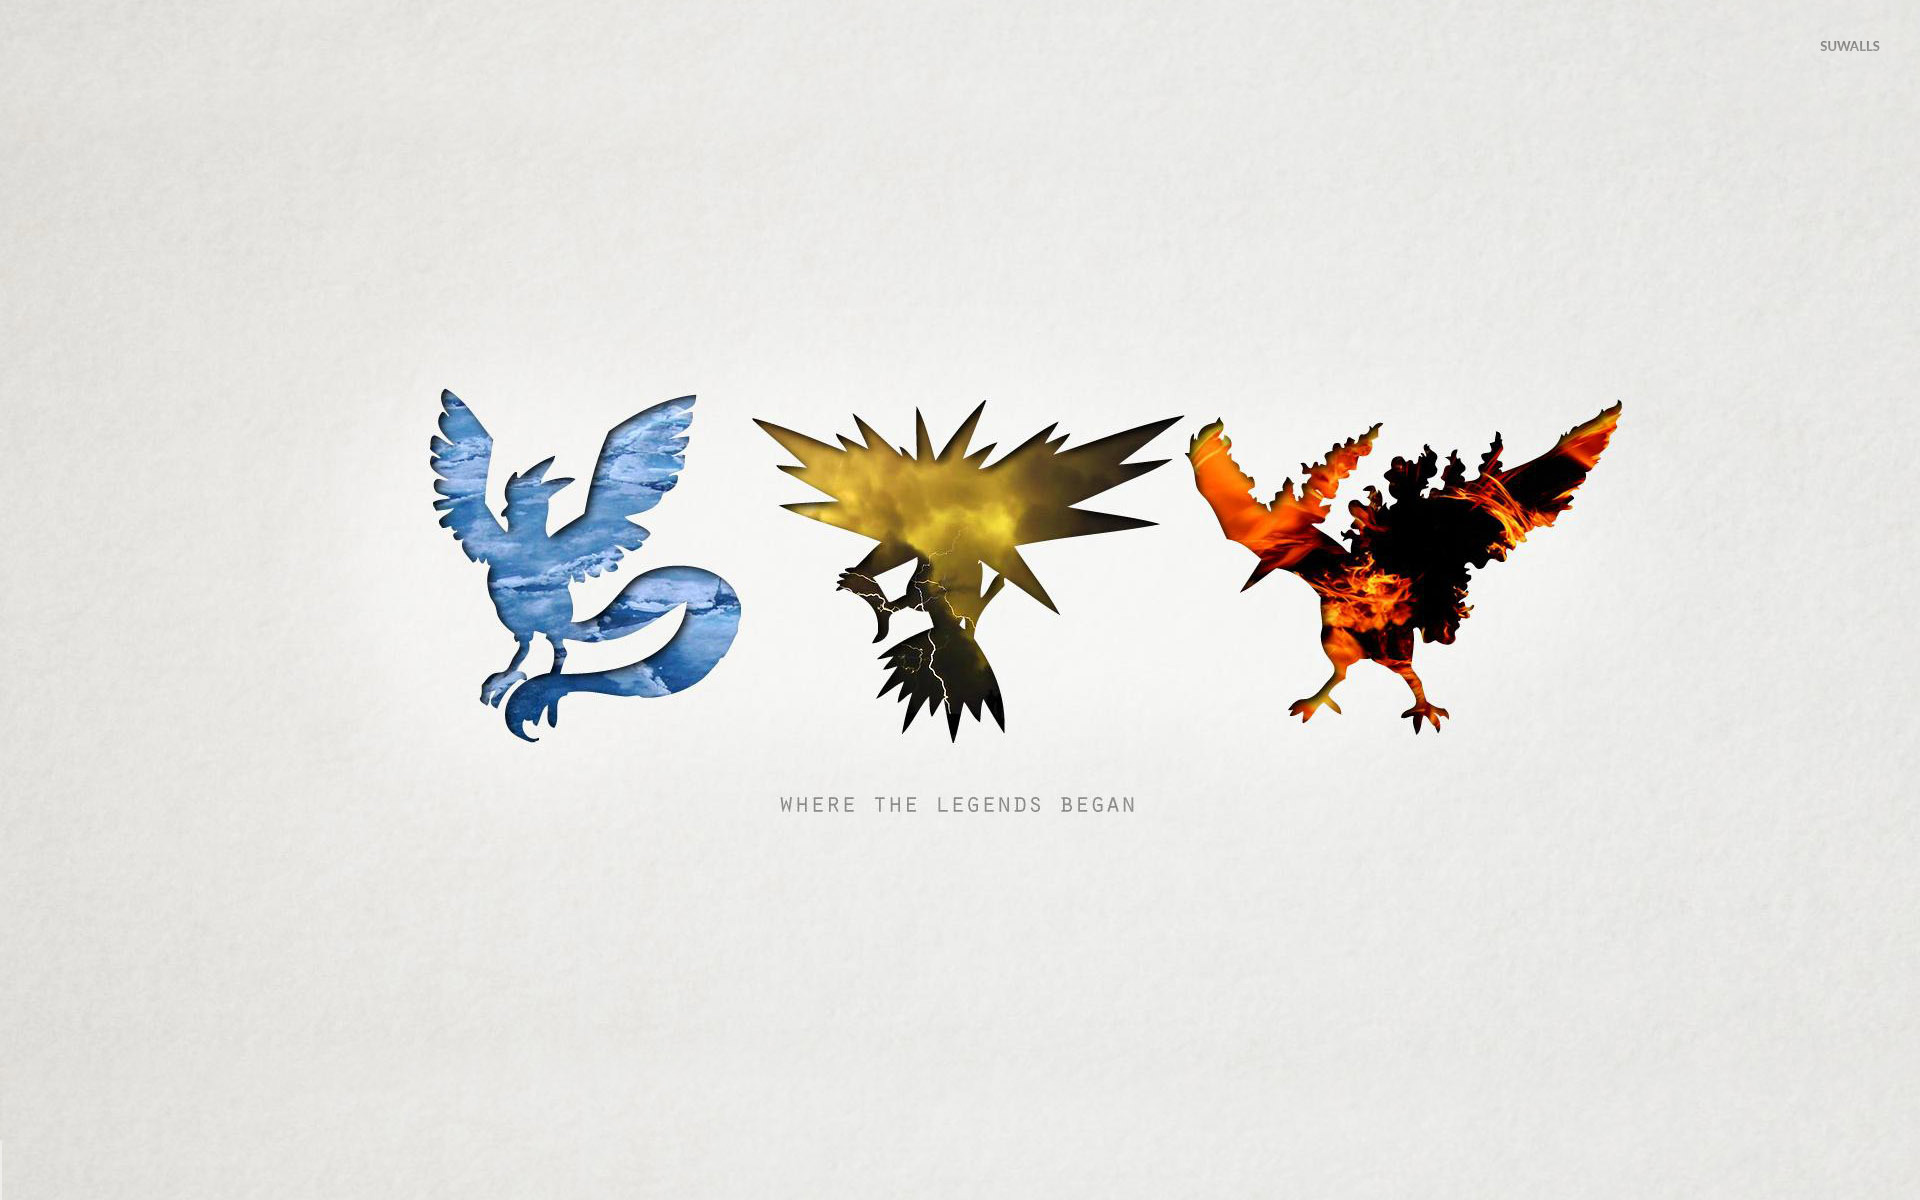 Where the legends began wallpaper - Minimalistic wallpapers - #26369